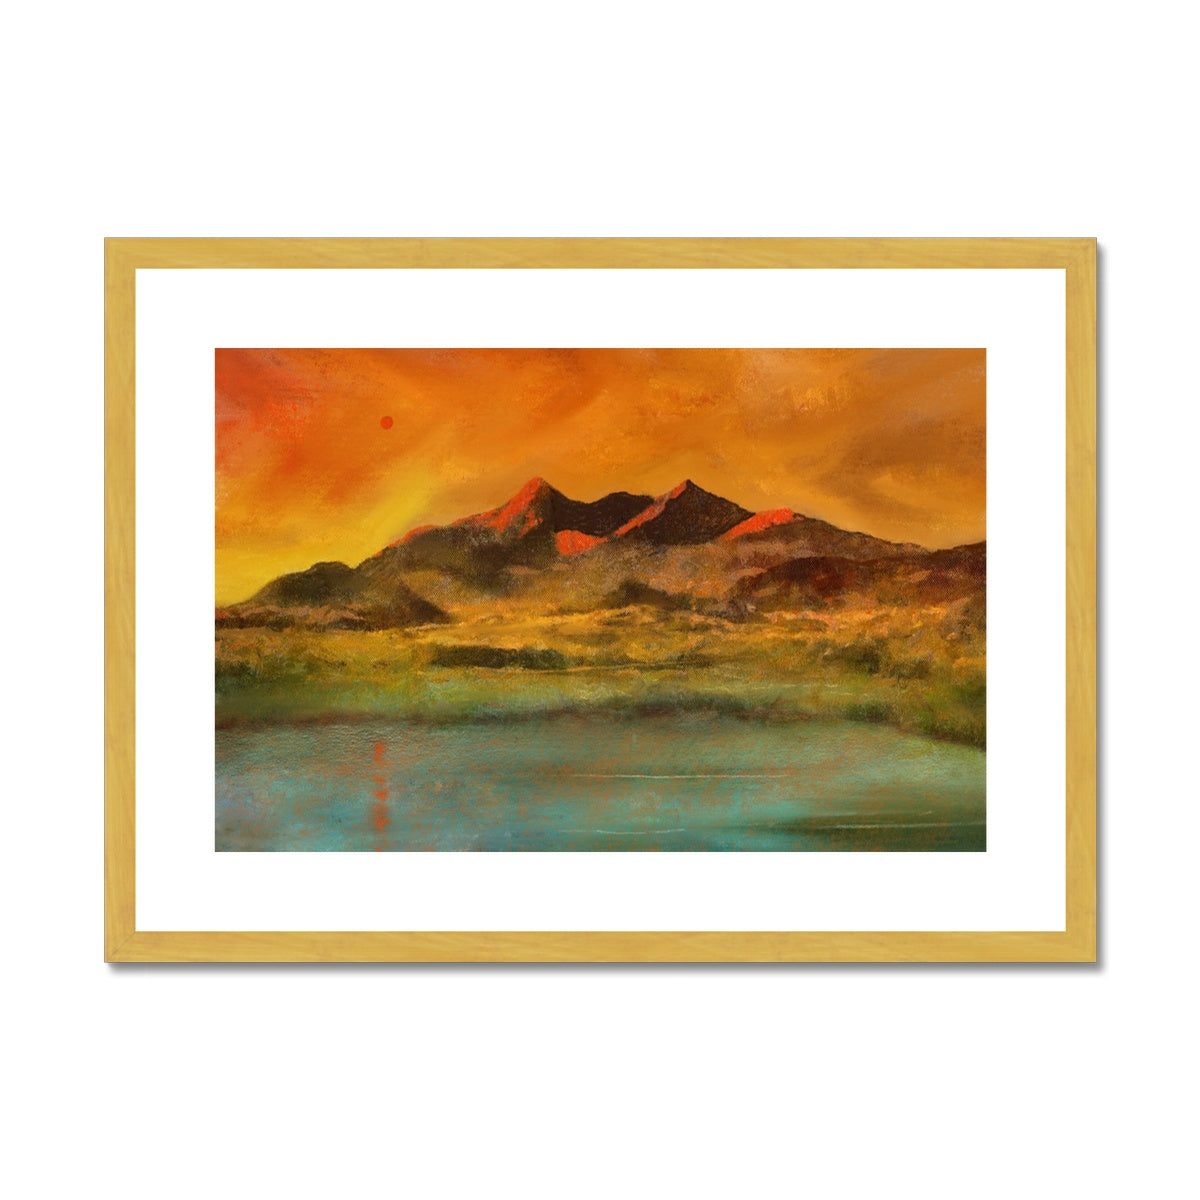 Skye Red Moon Cuilling Painting | Antique Framed & Mounted Prints From Scotland-Antique Framed & Mounted Prints-Skye Art Gallery-A2 Landscape-Gold Frame-Paintings, Prints, Homeware, Art Gifts From Scotland By Scottish Artist Kevin Hunter